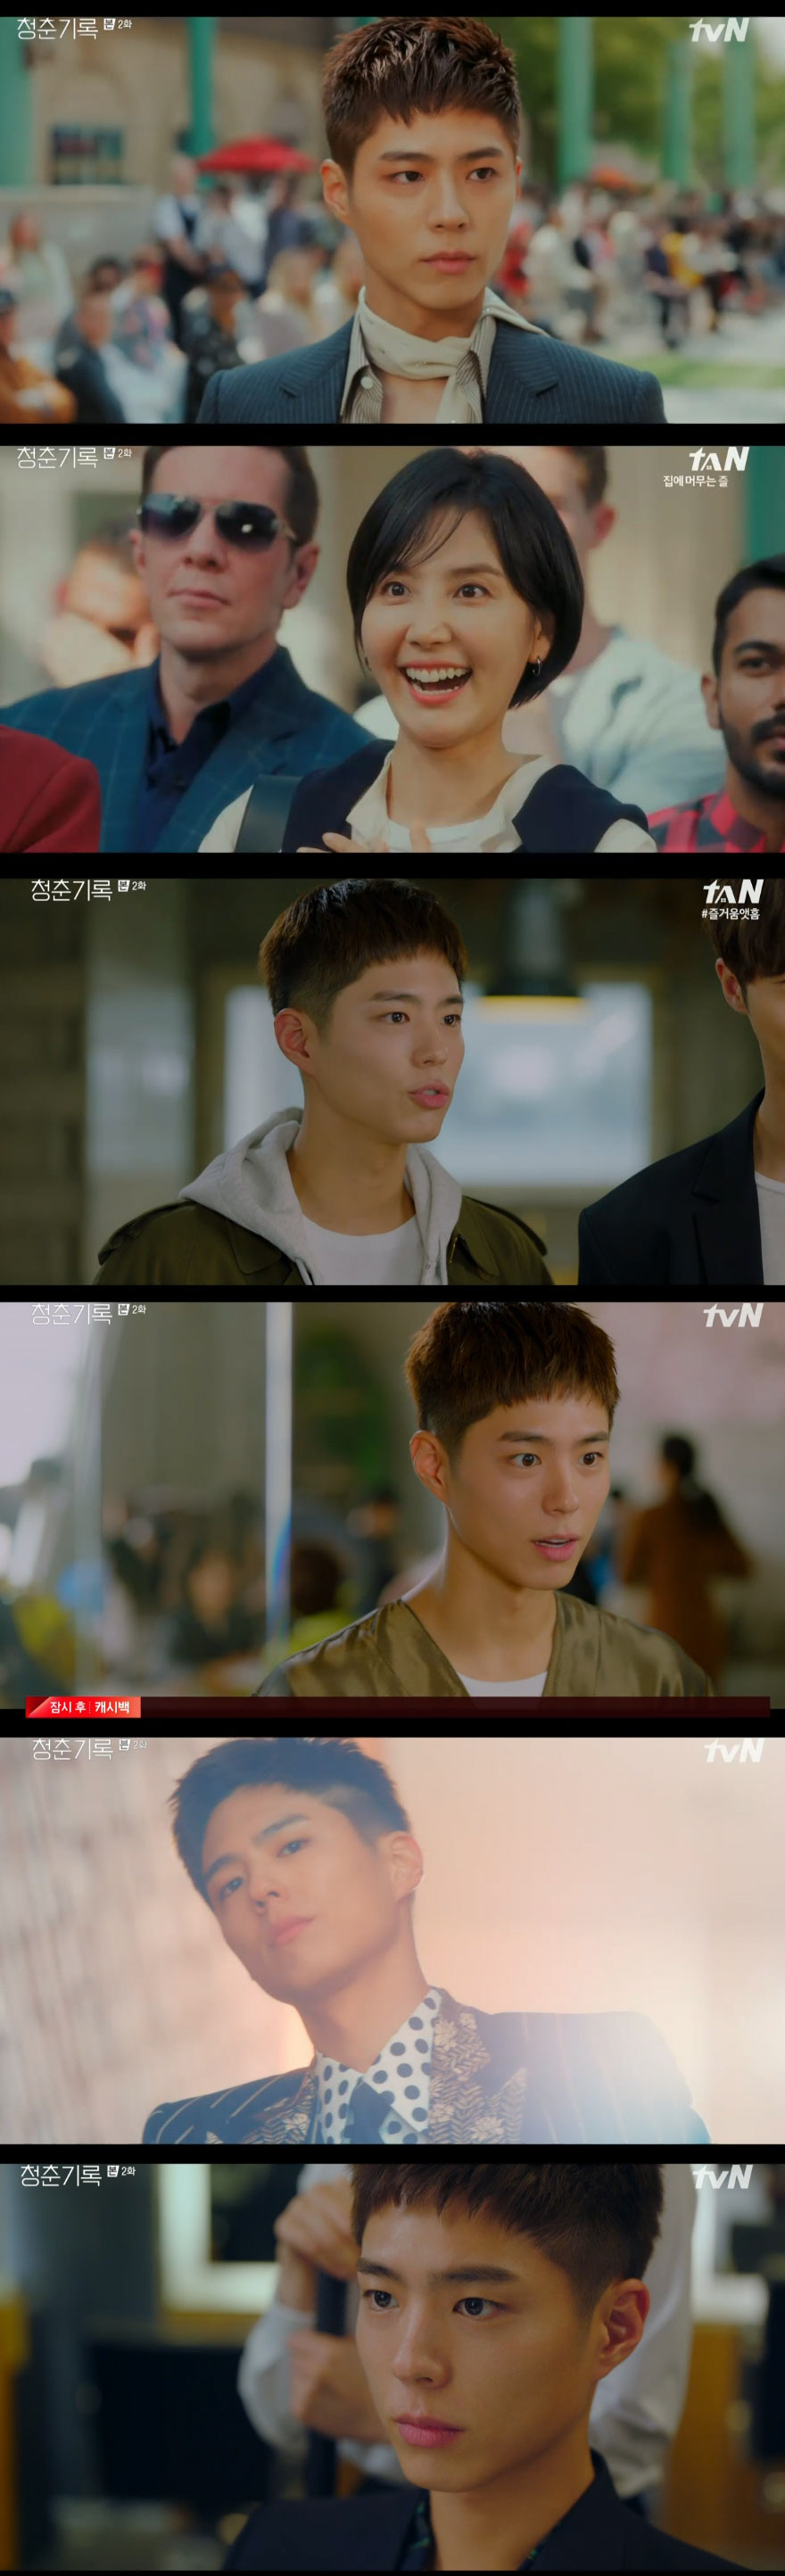 Record of Youth Park Bo-gum decides to join the militaryIn the TVN Monday drama Record of Youth, which was broadcast on the 8th, Sa Hae-jun (Park Bo-gum) was shown deciding to join the military.On this day, Ahn Jeong-ha (Park So-dam) read his feelings by watching the photos of Sa Hae-joon, Choi Ae.Earlier, he was embarrassed in front of Sa Hye-joon as Misunderstood by Pearl (Geo Ji-seung) Desiigner.Then Sahaejun said, Did you like me? Did you like me? And said, No. Sahaejun said, No. I understand.Some of my photos are better, he said, but I tried not to say it, but I am a fan of Won Hae-hyo (Byeon Woo-suk). Why are you sure its me?The embarrassed Sahajun said, Why were I sure? I thought it was a fact. The stable Misunderstood. So Sahajun said, So it is less embarrassing.I do not like to be mistaken, he said. It is a good girl. It is an excellent virtue. At that time, Sa Hye-joon asked An Jeong-ha, How old are you? And said, Lets Friend in the words of An Jeong-ha.In the meantime, Sa Hye-joon said, You were so unfair earlier, werent you? I did not do it, but I received Missunderstood. I know that.When Sa Hye-joon, who is stable, turned around, I knew for sure why he liked Sa Hye-joon among many stars. He has a special empathy.After the show, Chali-Jung (Lee Seung-Jun) of Desiigner talked to Sa Hye-Jun. The past of the two was revealed five years ago.In the past, Charlie invited Sa Hye-joon to the pension. There were full of Sa Hae-juns favorite foods.When do others come? asked Sa Hye-joon, and Charlie Jung said, Nothing comes. Charlie Jung offered a sponsor to Sa Hye-joon, saying, You know this floor, do you start at first?Then, Sa Hye-joon refused, I respect you. I do not want to hurt you. However, Charlie Jung hugged Sa Hye-joon, who was trying to go out, saying, I do not want to stop because I started.Currently, Charlie Jung tells Sa Hye-joon, You are so cool. Thats your charm. Do you need money? If you heard me five years ago, I will be your agency.If you want to be an Actor, Ill also sponsor it. You have a week of time, he suggested again.On the other hand, when he heard that he had fallen into the audition, he went home with a depressed feeling.At that time, Father Sa Yeong-nam (Park Soo-young) said, The audition has fallen, and said, Its good, Ill go to the army now.When I was doing a model for you, my brother went to Seoul National University without being a monster, he said. I did not recognize anyone on the street that I was a tower model.Here, his brother, Sa Kyung-joon (Lee Jae-won), said, Your luck is that far, how much money do you have in your bankbook for seven years? And Sa Hae-joon said, Do not give me a medal in my life.Why do you imagine my future at your disposal? Then my grandfather, Sam Min-ki (Han Jin-hee), took the side of Sahaejun, and then Samingi told Sahaejun, I want to make money and give you your father.I do not go to the hospital because I save money. I am upset. The next day, Lee Min-jae (Shin Dong-mi) visited Sahaejun.Lee Min-jae, who was once again the head of the agency, Lee Tae-soo (Lee Chang-hoon), refused to show overseas to Sahaejun, so that he could stand on the show.I will fold this work afterwards, he said, there is no airplane value and room price. After that, he went to Charlie Jung and said, I refuse. I admired and liked the teacher. I appreciate the proposal. Charlie Jung said, You are really bad hair.You will end your life on the construction board like your father. The deceased said, Please remember, I kept my courtesy to the teacher. There, Lee Min-jae was waiting for the Dead Sea, and Sa Hae-jun came to the show with the help of Lee Min-jae, and returned home and headed for the stable stage with Won Hae-hyo.I think we should win Pearl Sam once, Sahaejun said to An Jeong-ha, and Im pushing him like this.Especially, at the end of the broadcast, Sahaejun heard from Lee Min-jae that Won Hae-hyo was frustrated by the recognition of the movie casting, and went to a stable place and said, Cut your hair short.I am going to the army, he said, raising expectations for future development.